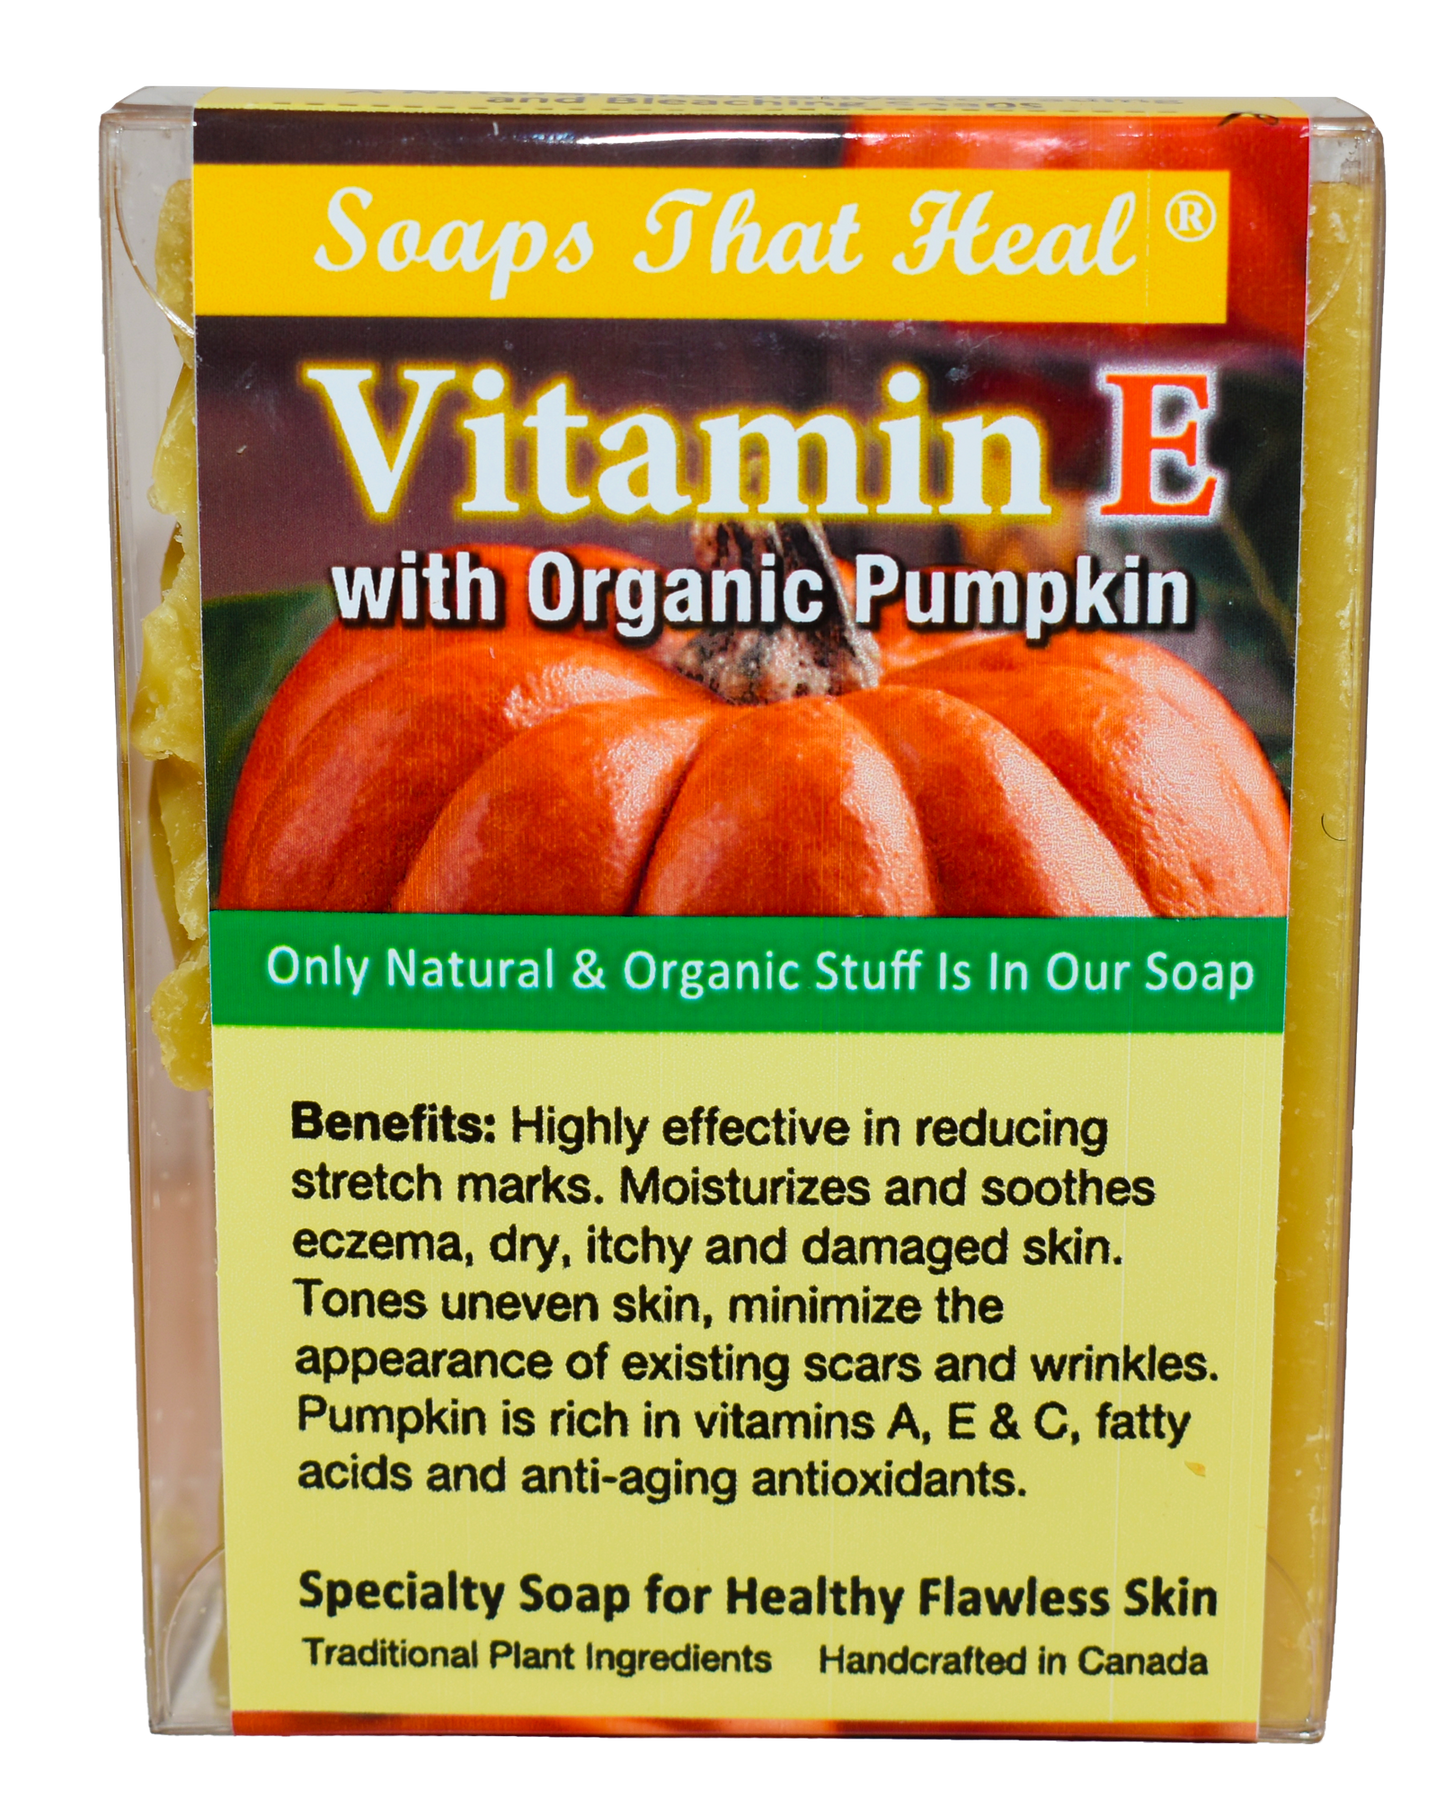 organic pumpkin, vitamin e soap,natural alternatives to whitening creams,fade creams,bleaching creams,Remove Dark Spots and Acne,aspen kay,Healthy Skin, Natural Products Skin Care, problem skin,the best body soap,saje,soaps that heal,healing soap,how to get rid of dark marks,dark spots,whitening soaps,lightening soaps,hyperpigmentation